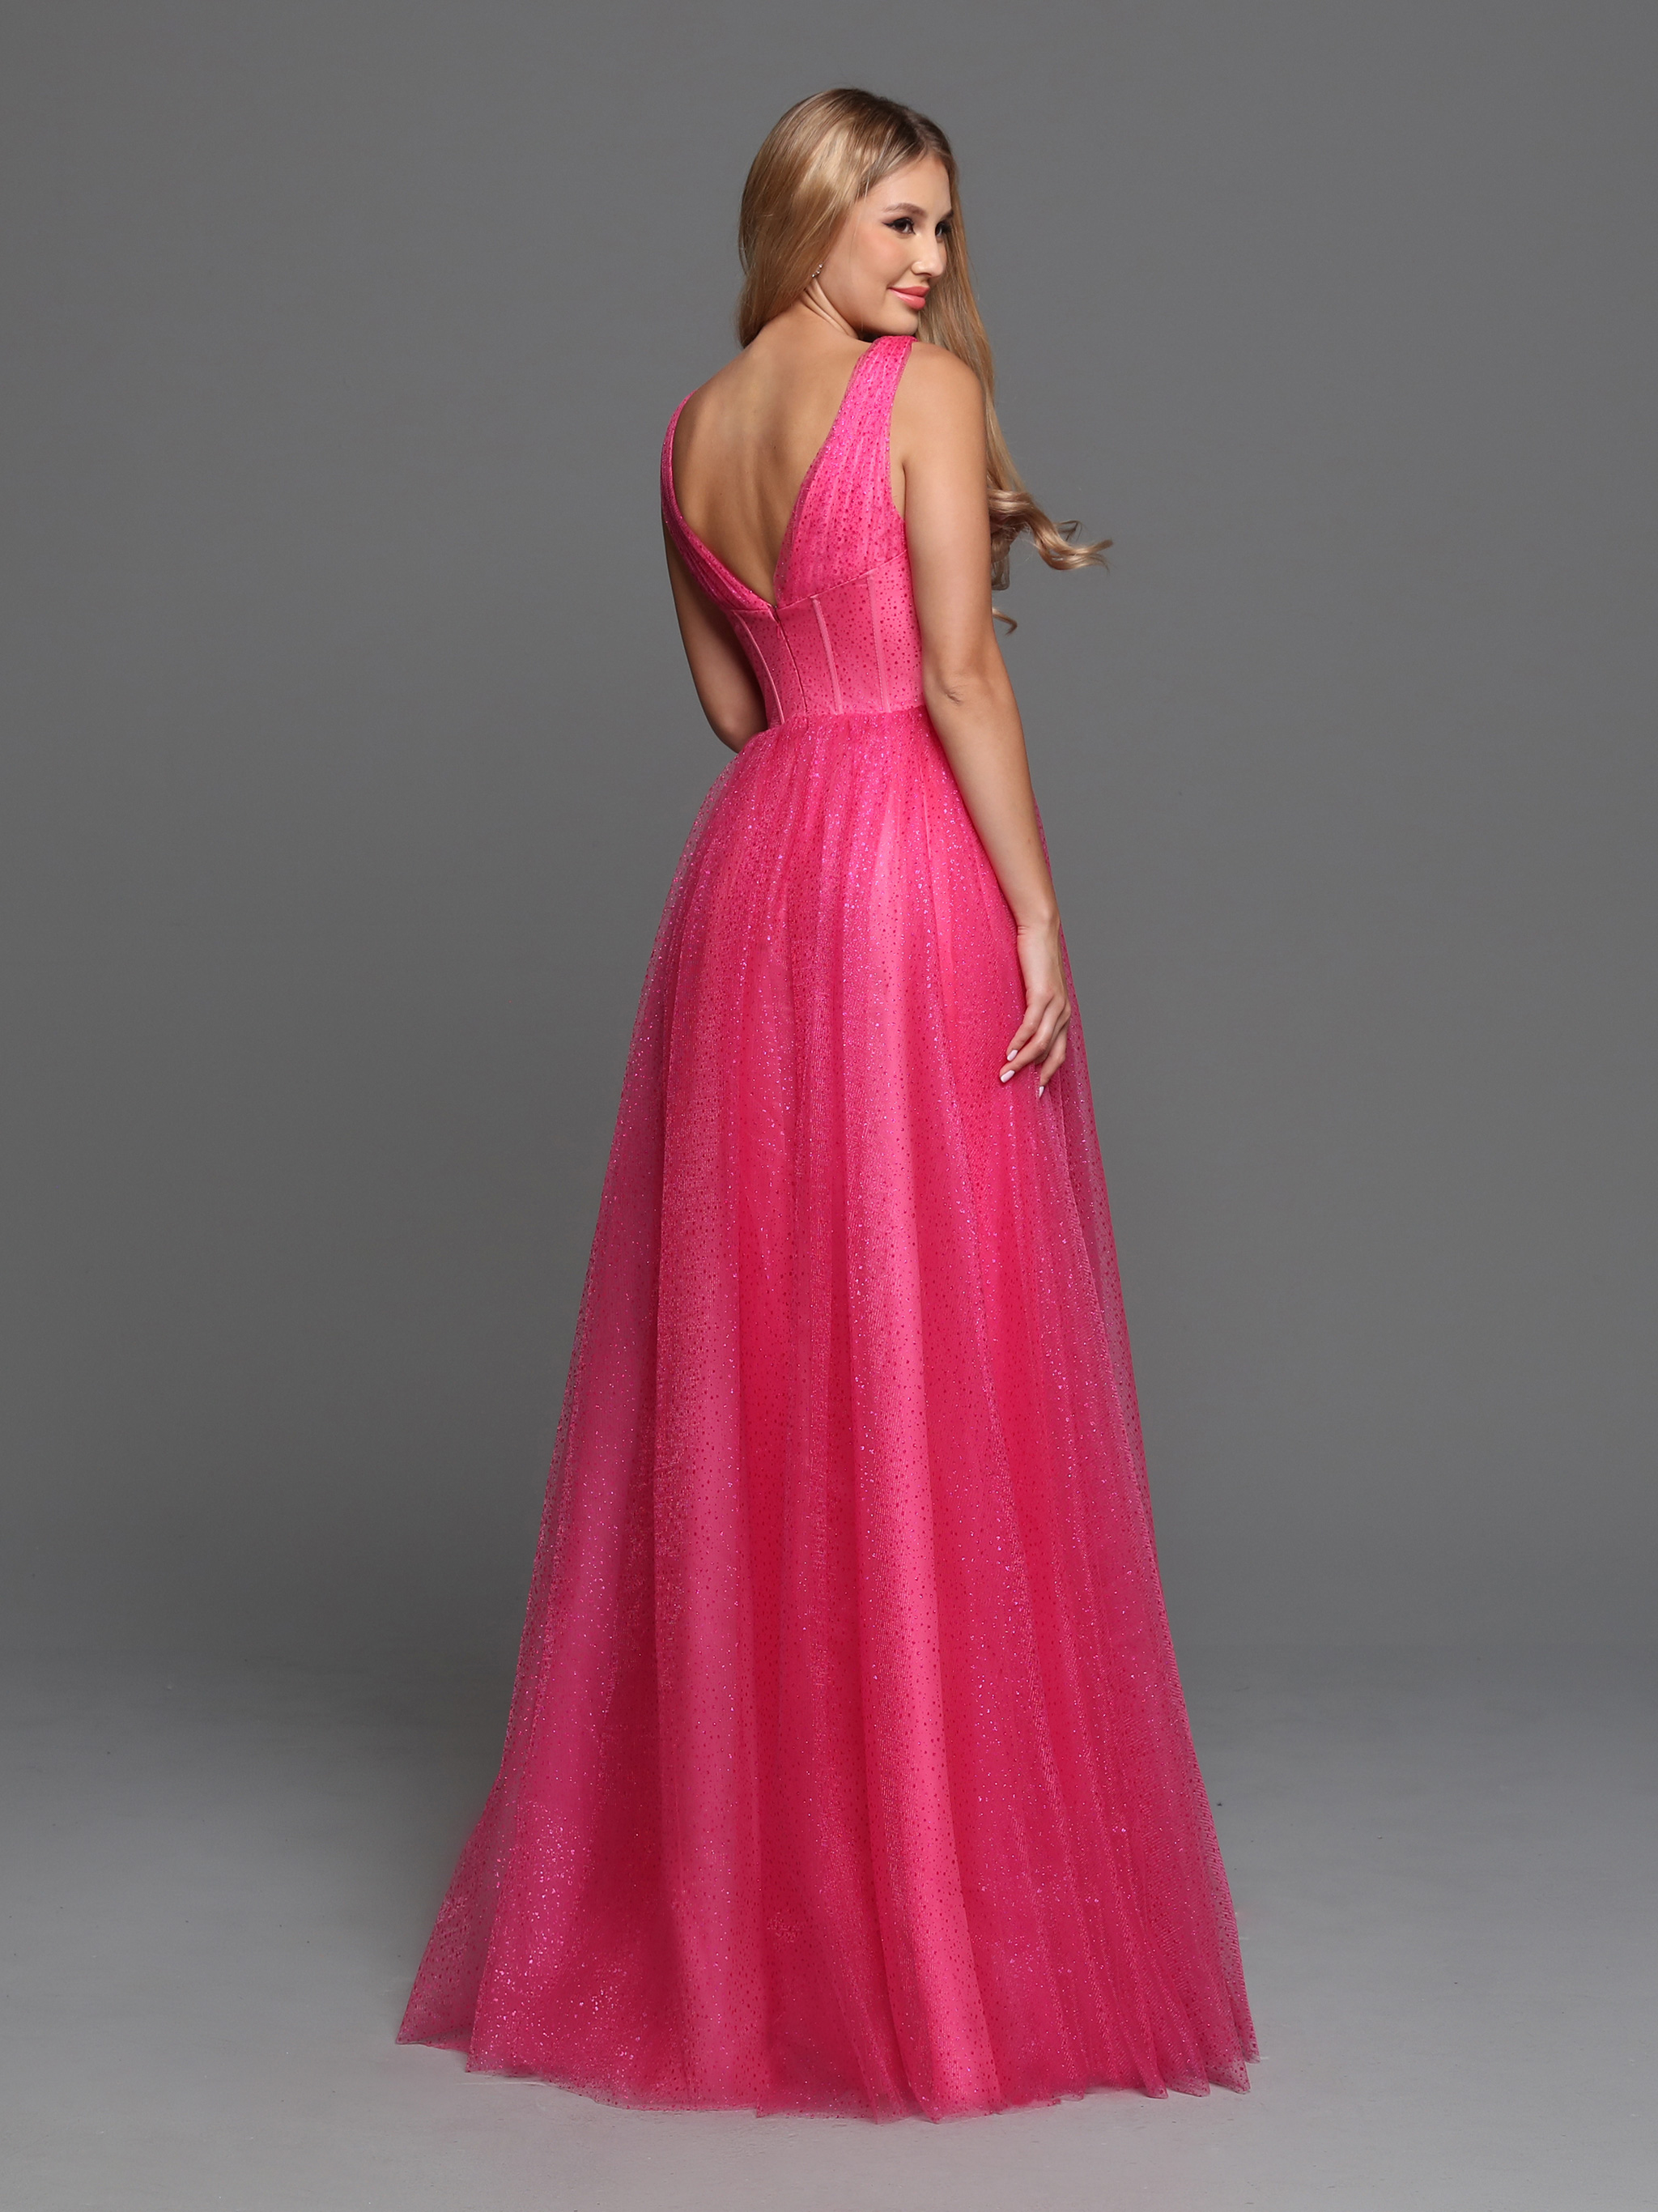 Image showing back view of style #72285